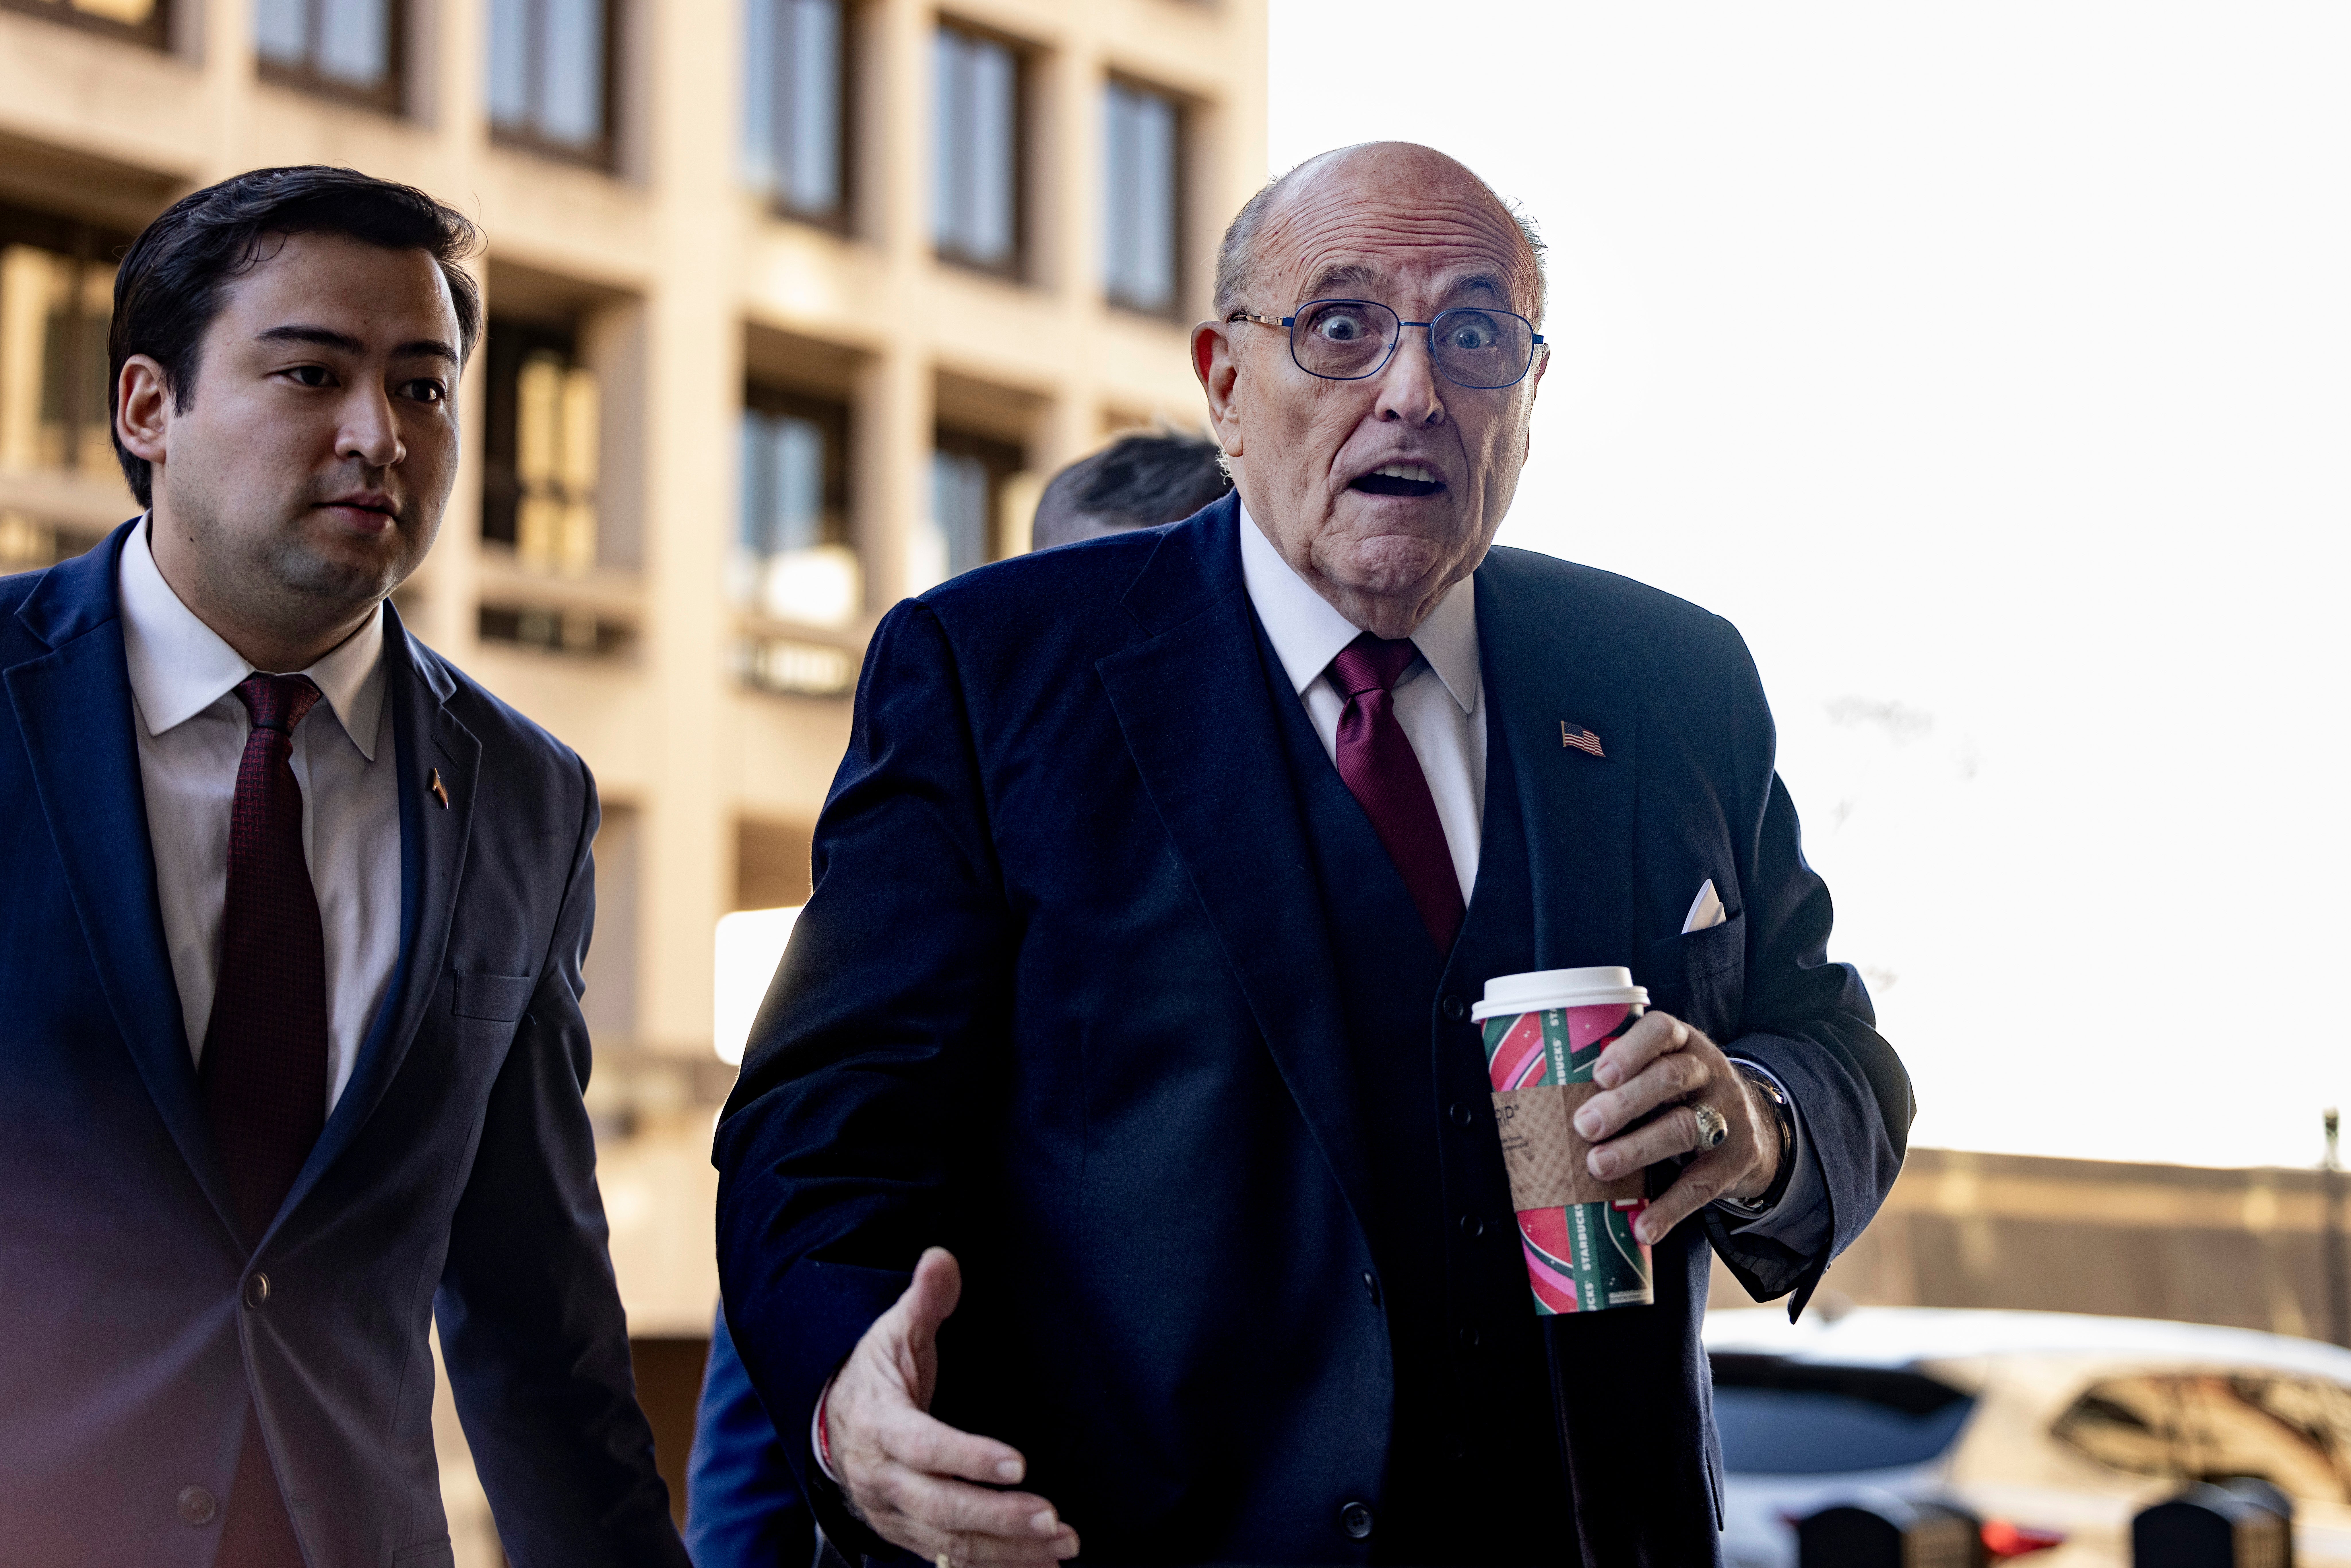 Rudy Giuliani arrives at US District Court in Washington DC on 15 December, the day an eight-member jury ruled he must pay a pair of election workers nearly $150m for his lies about them